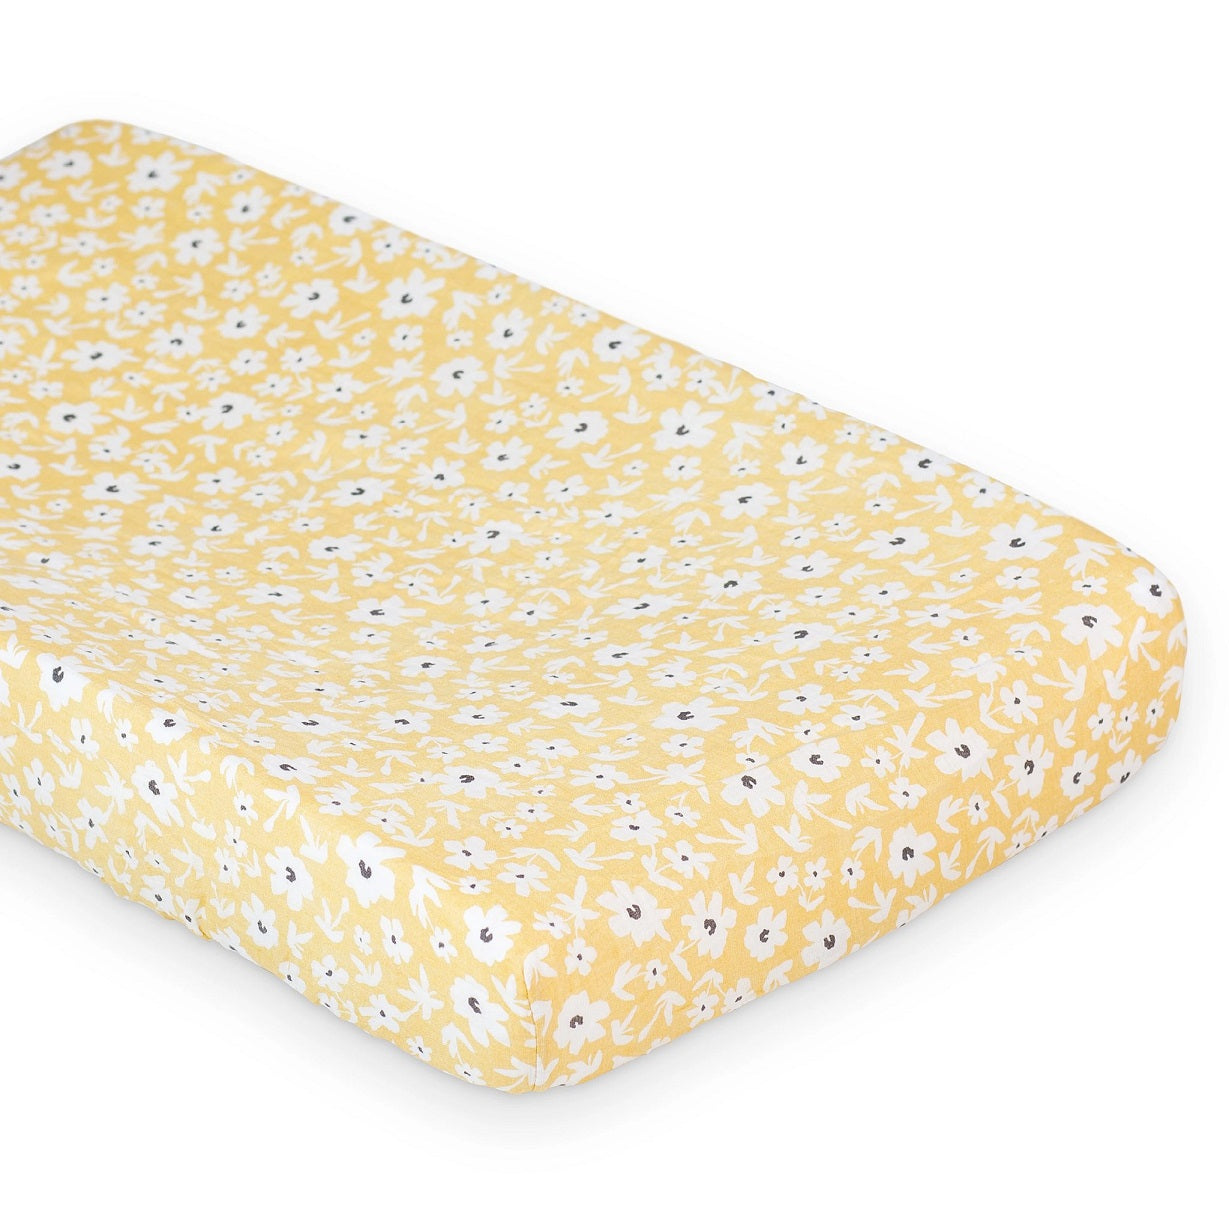 Lulujo Yellow Wildflowers Changing Pad Cover